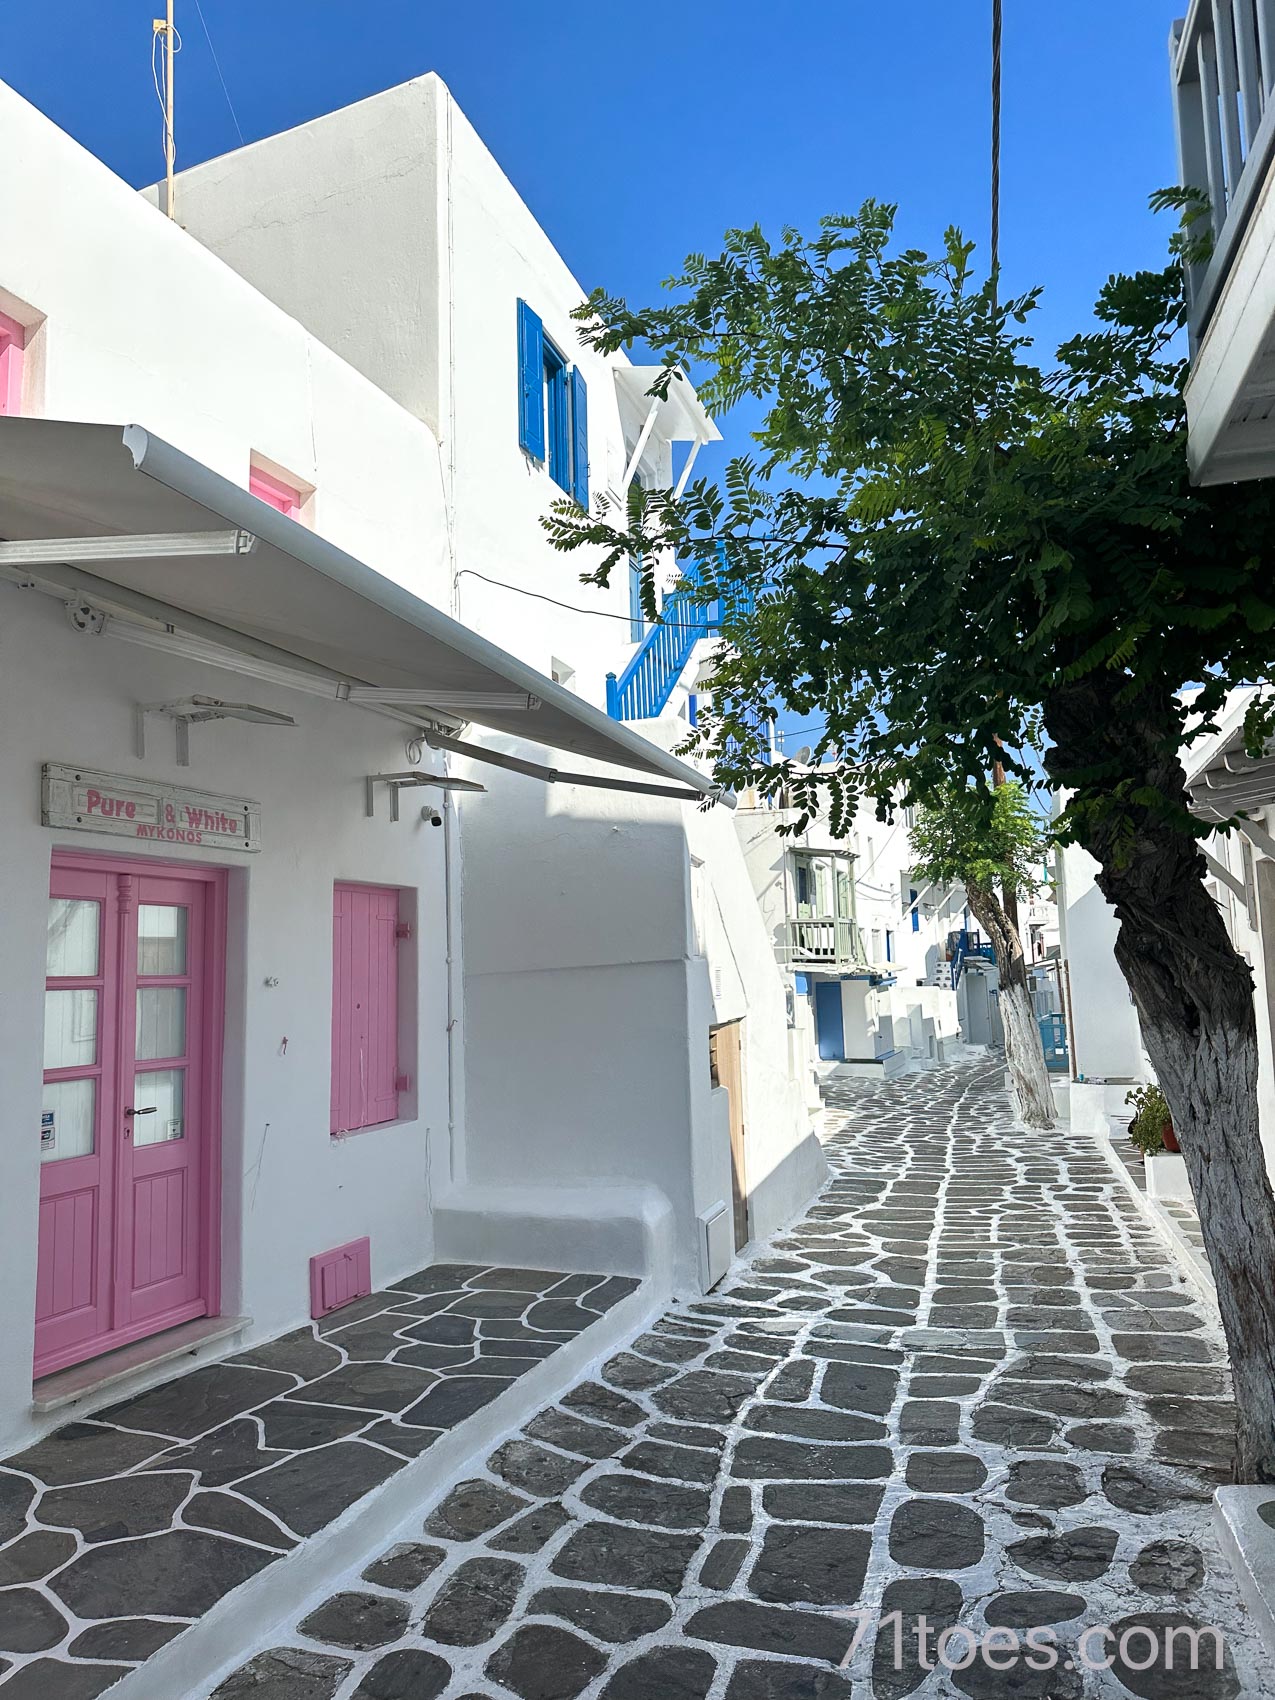 A small alleyway in Mykonos with pink doors